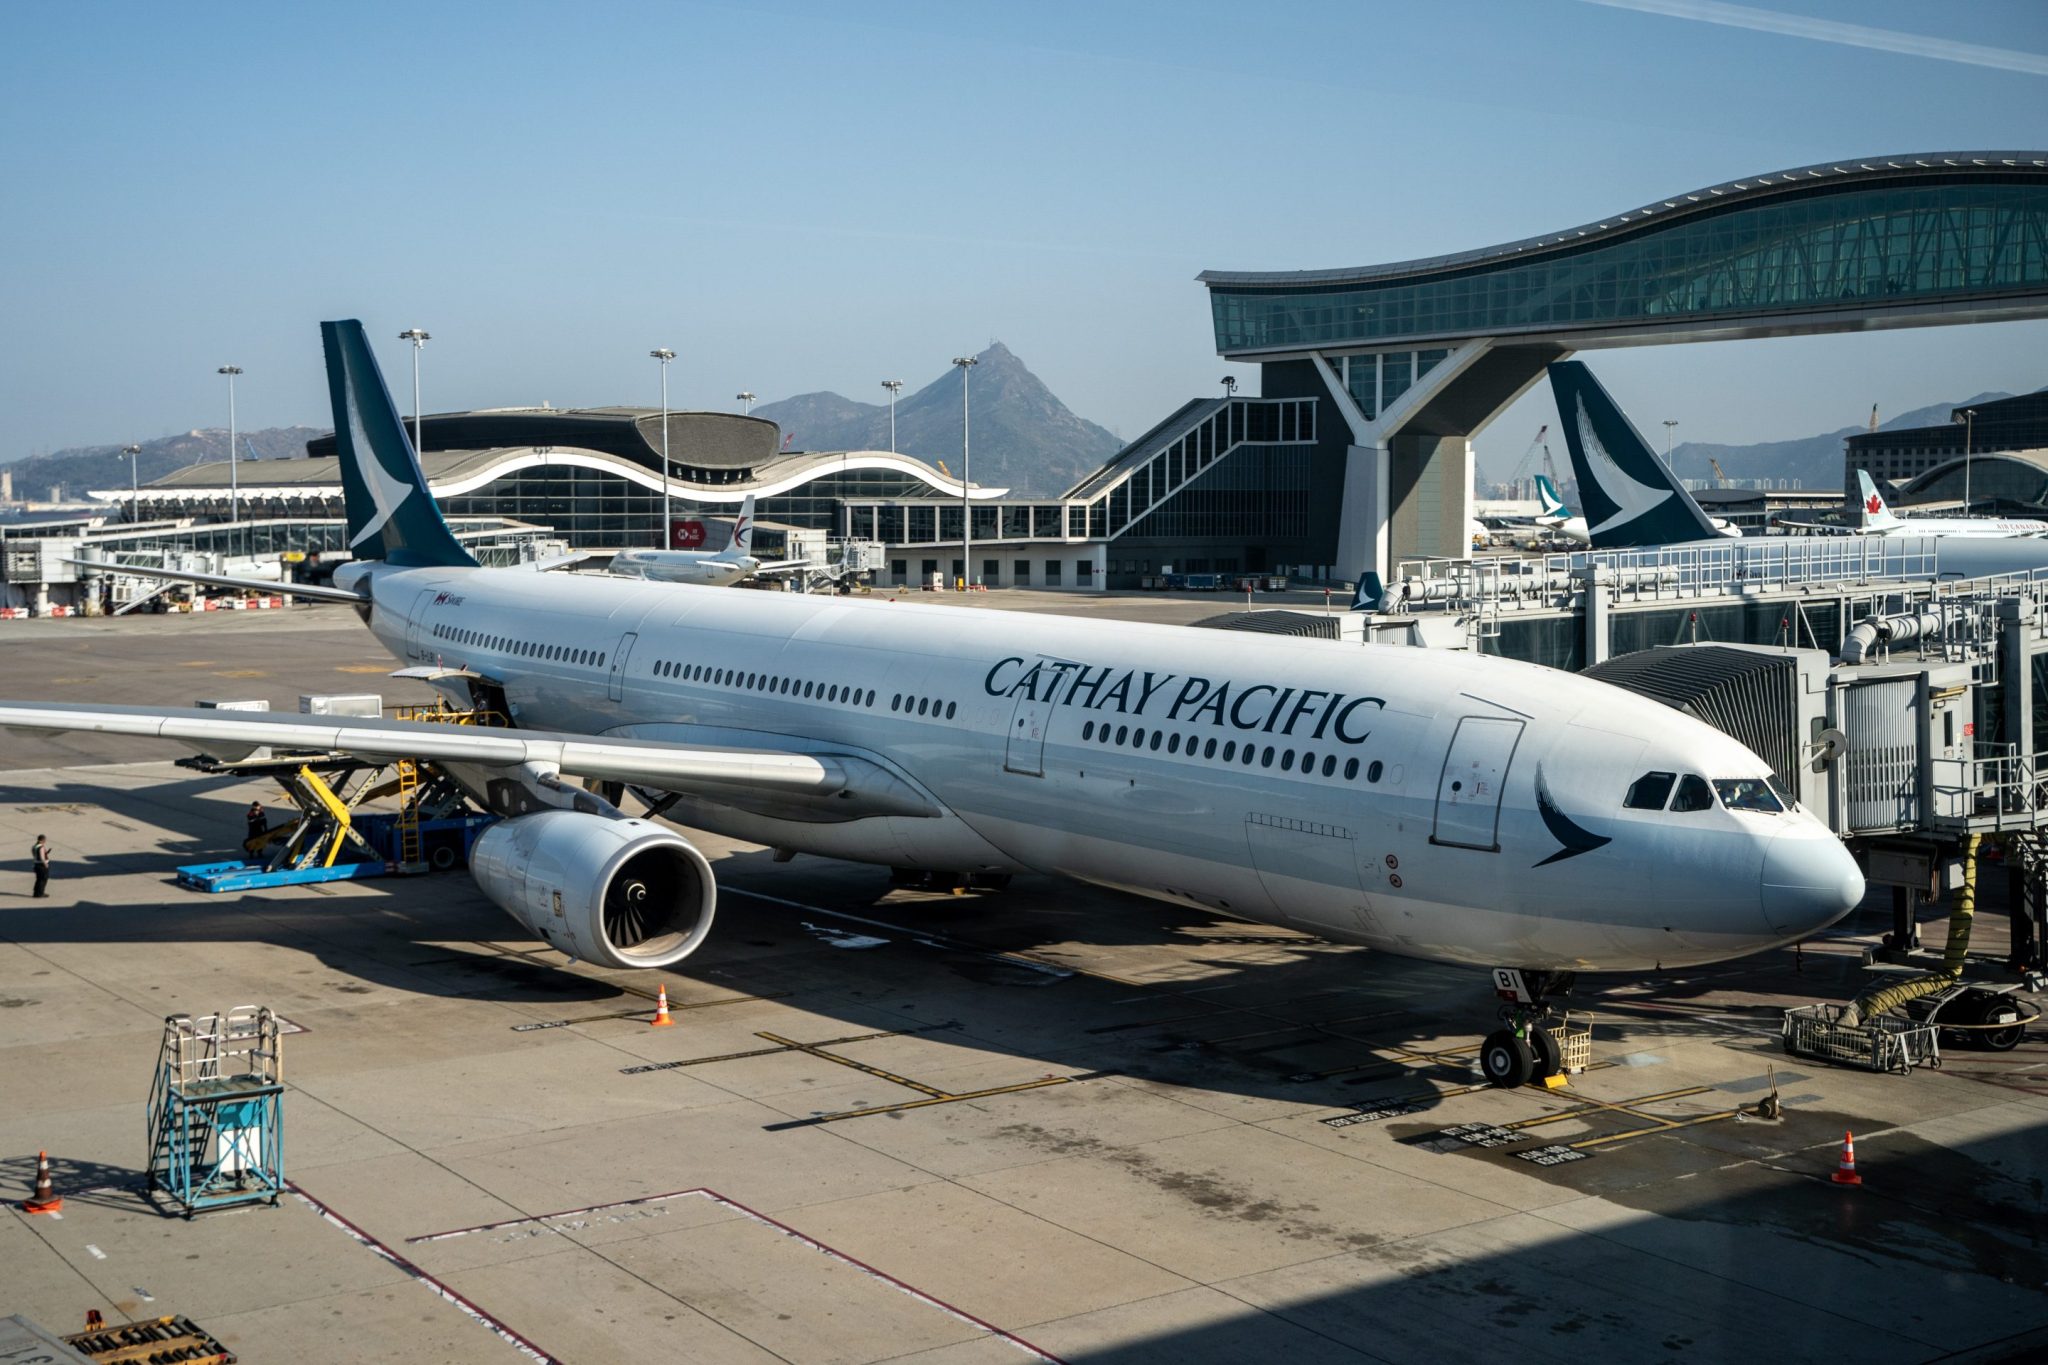 Cathay Pacific slashes hours needed to become captain amid labor shortage